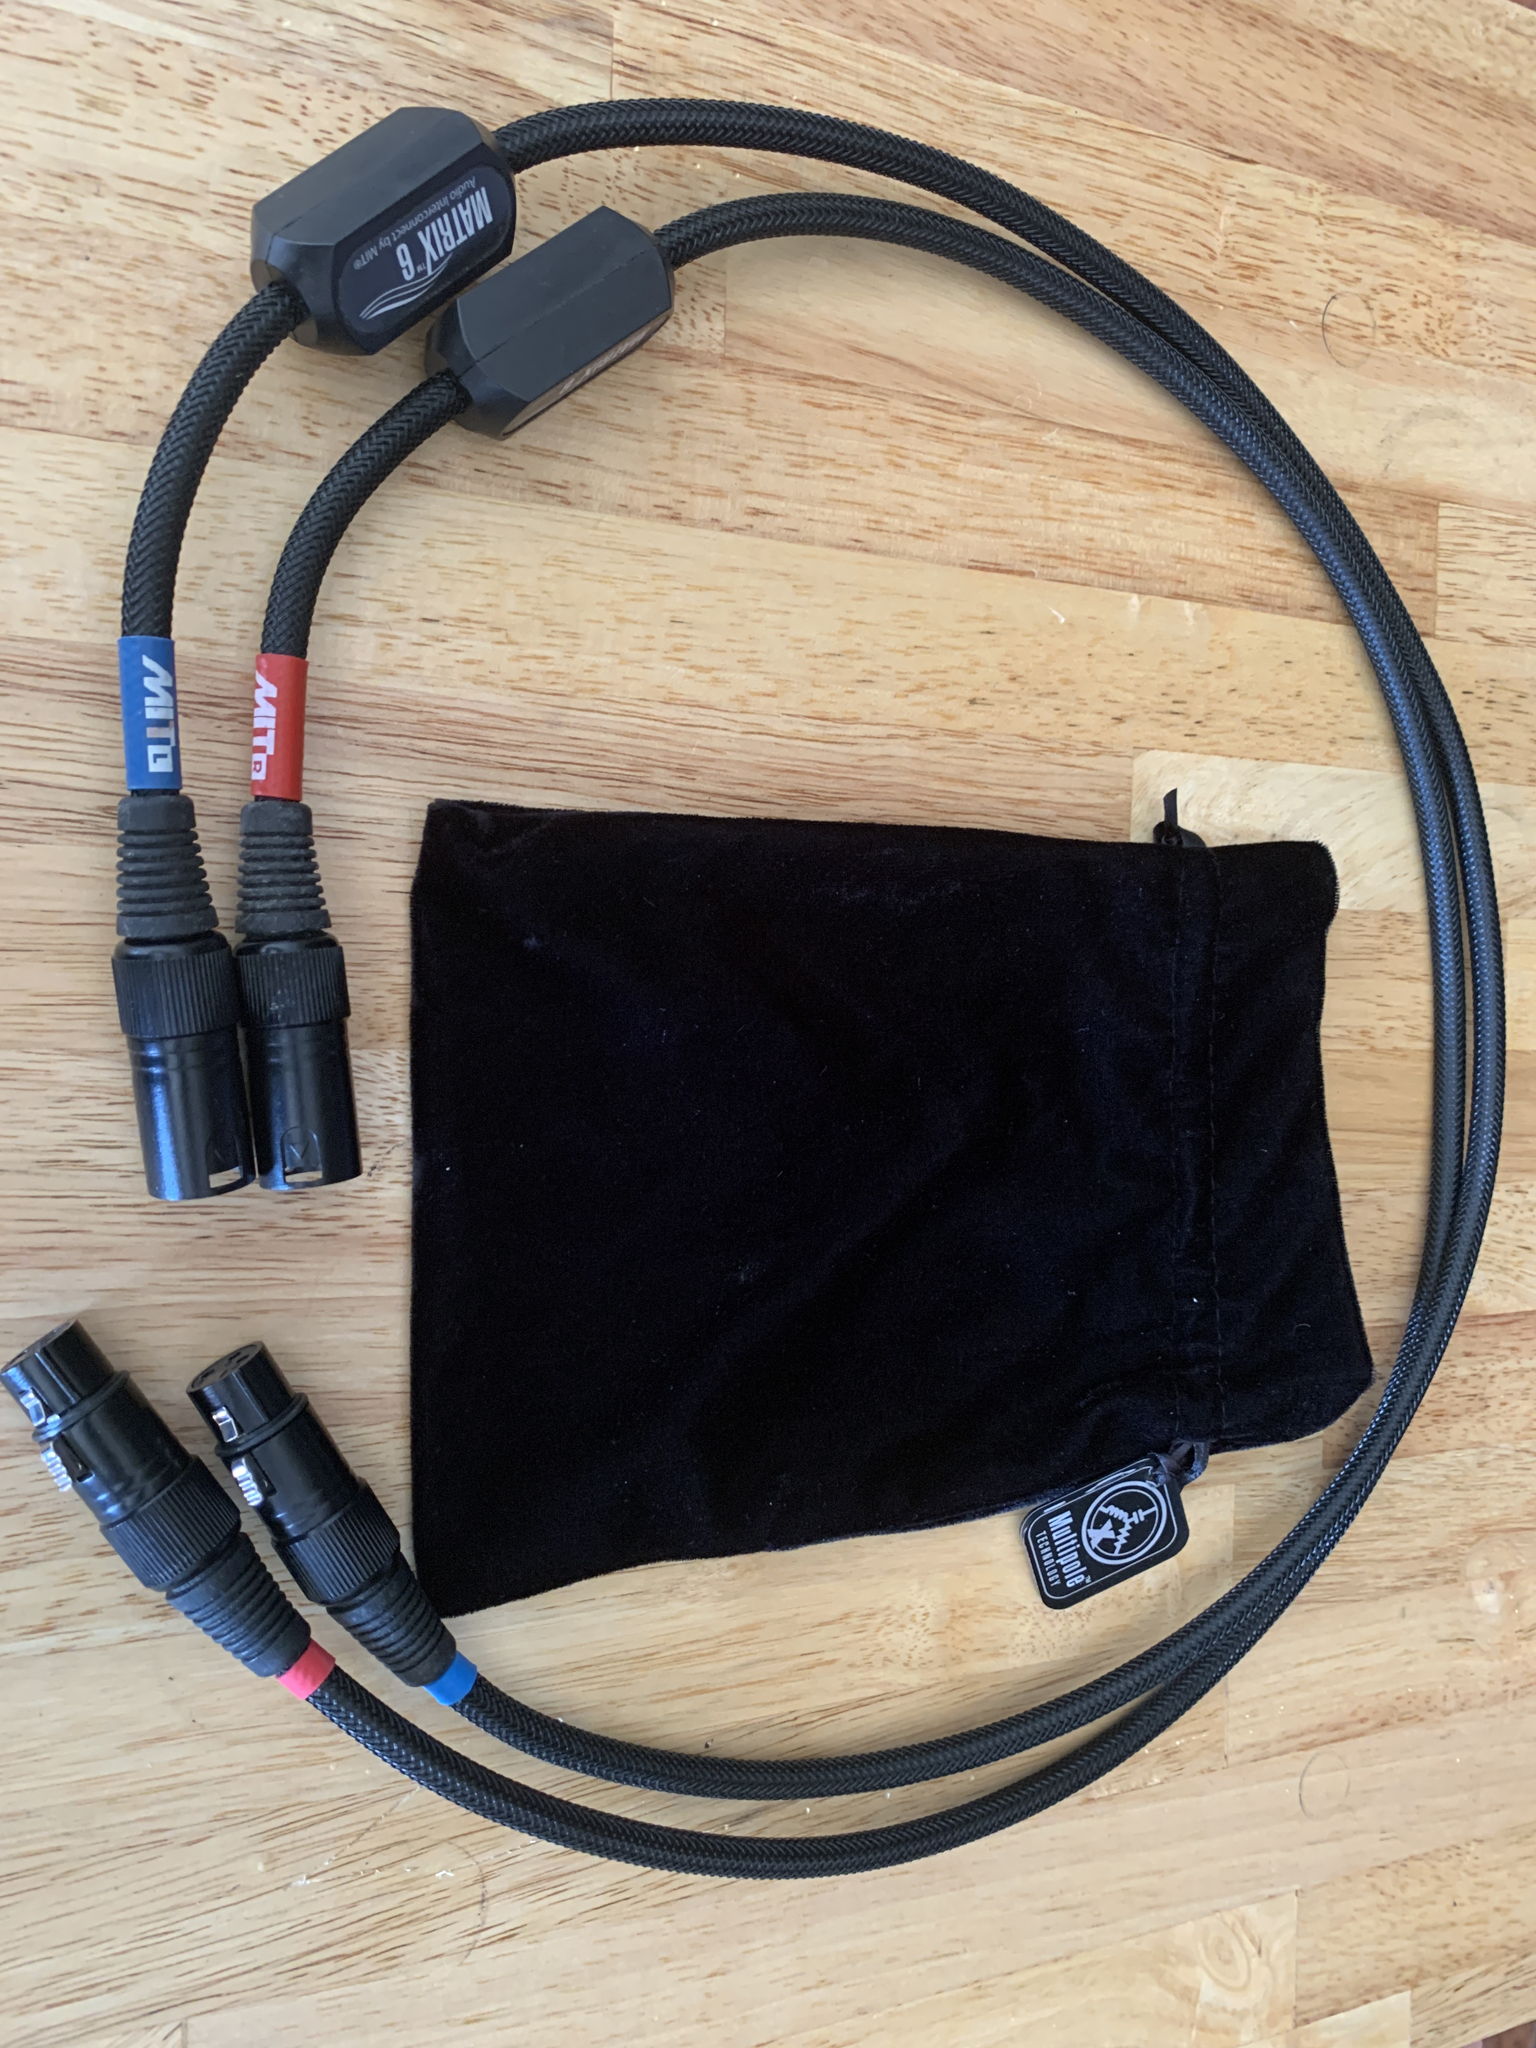 MIT Matrix 6 XLR Interconnects 1m with Bag and Box